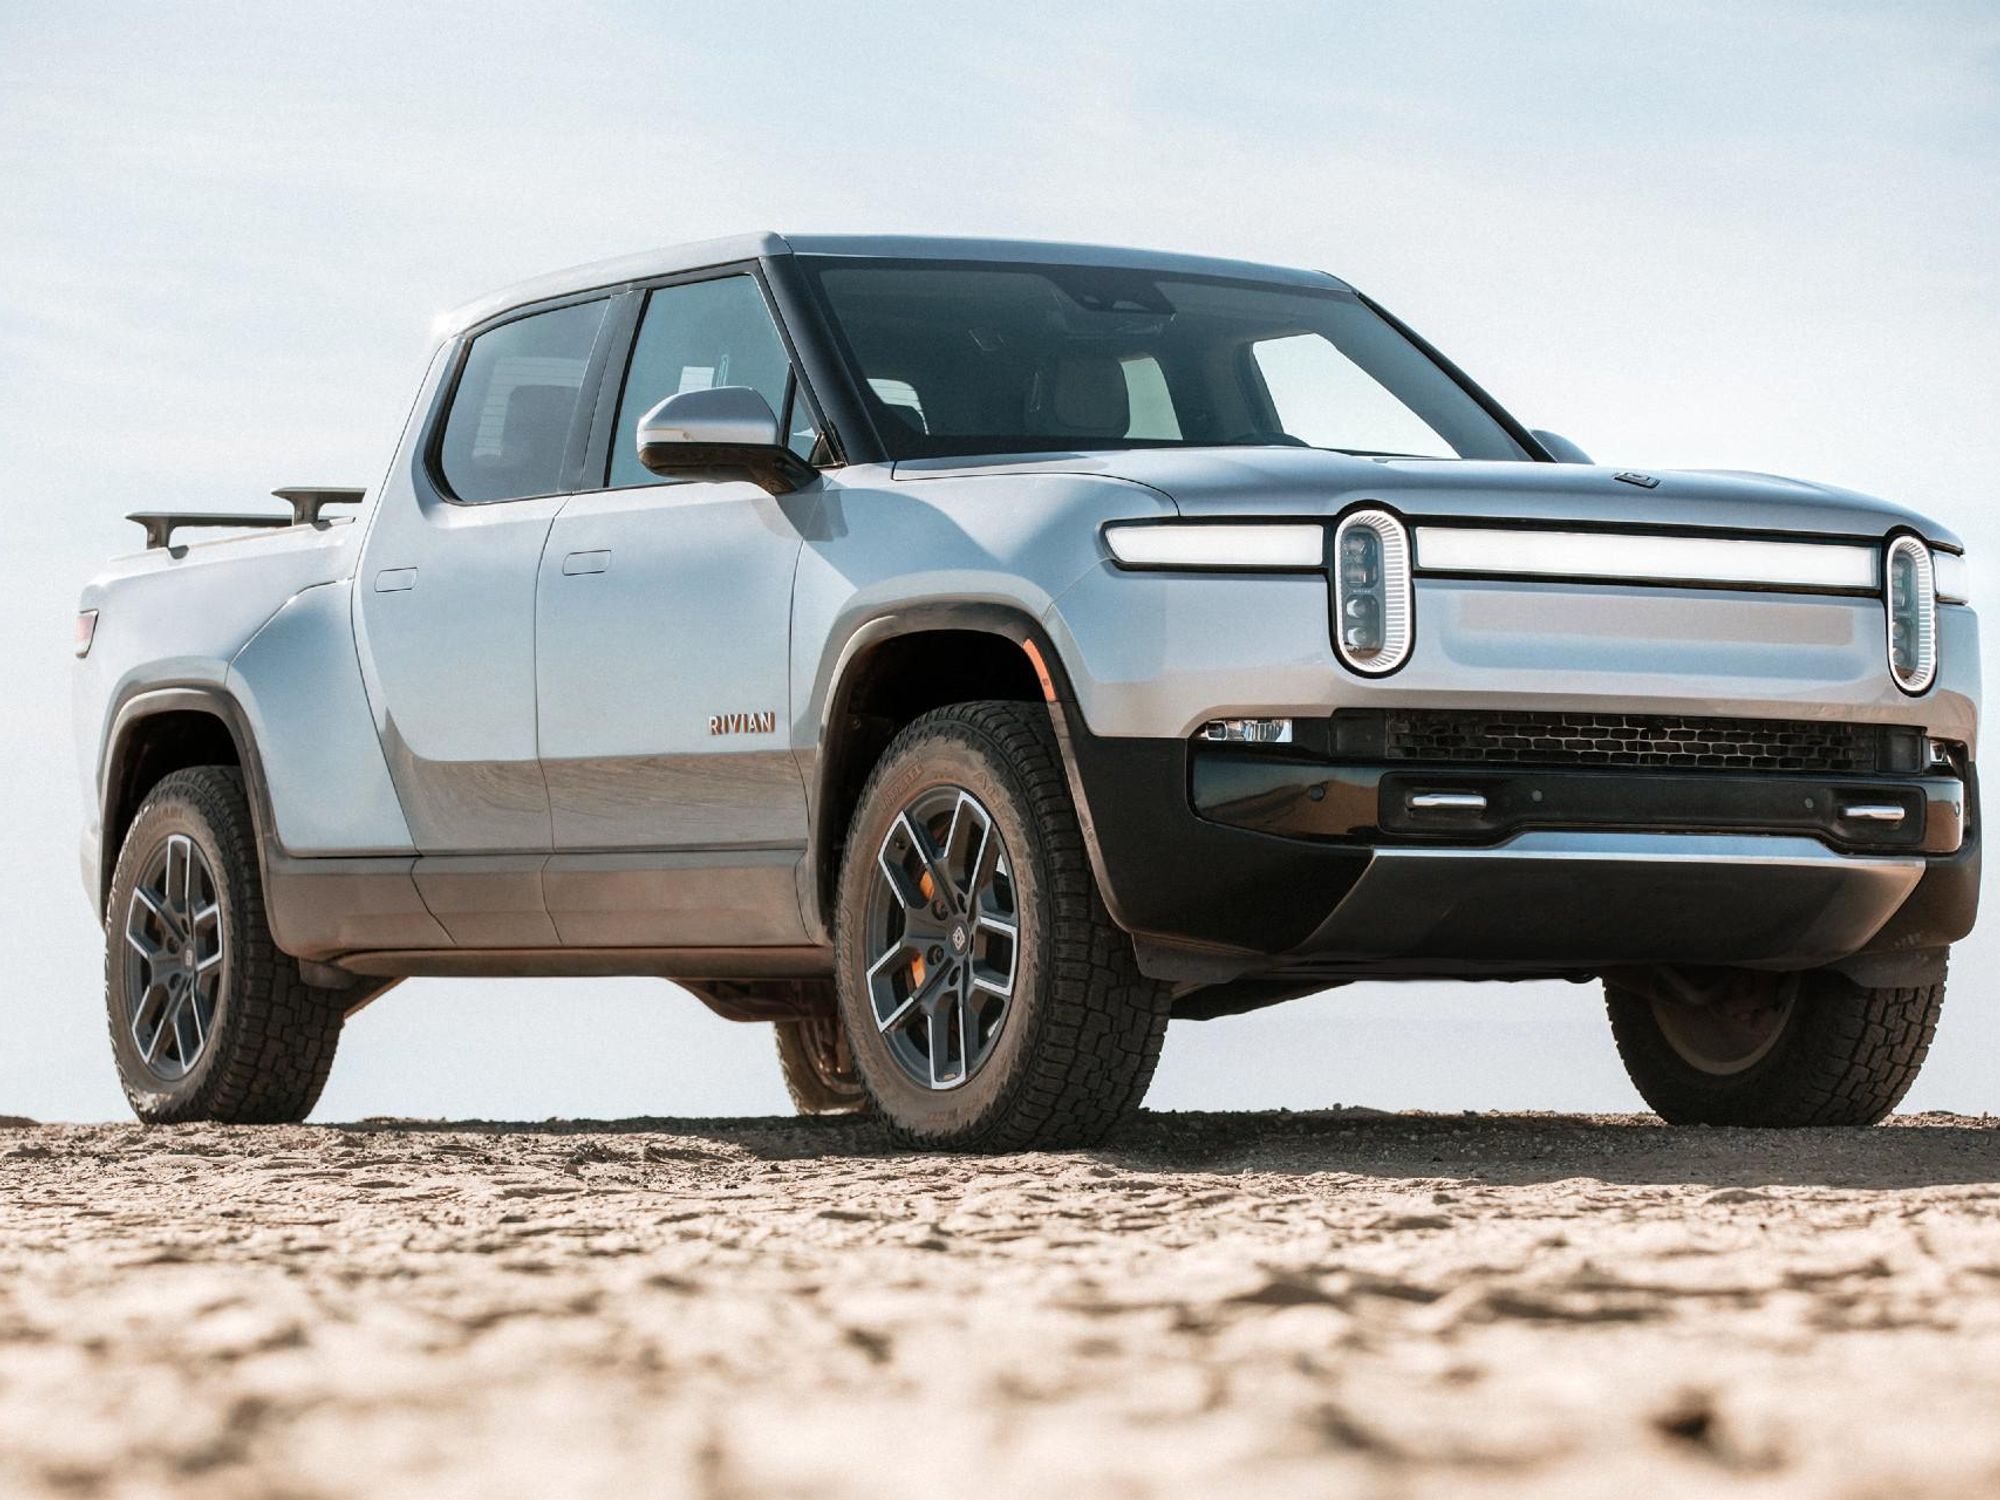 Rivian's Price Increase Has Left Customers Feeling Betrayed - Are You Sticking With Rivian or Looking Elsewhere?